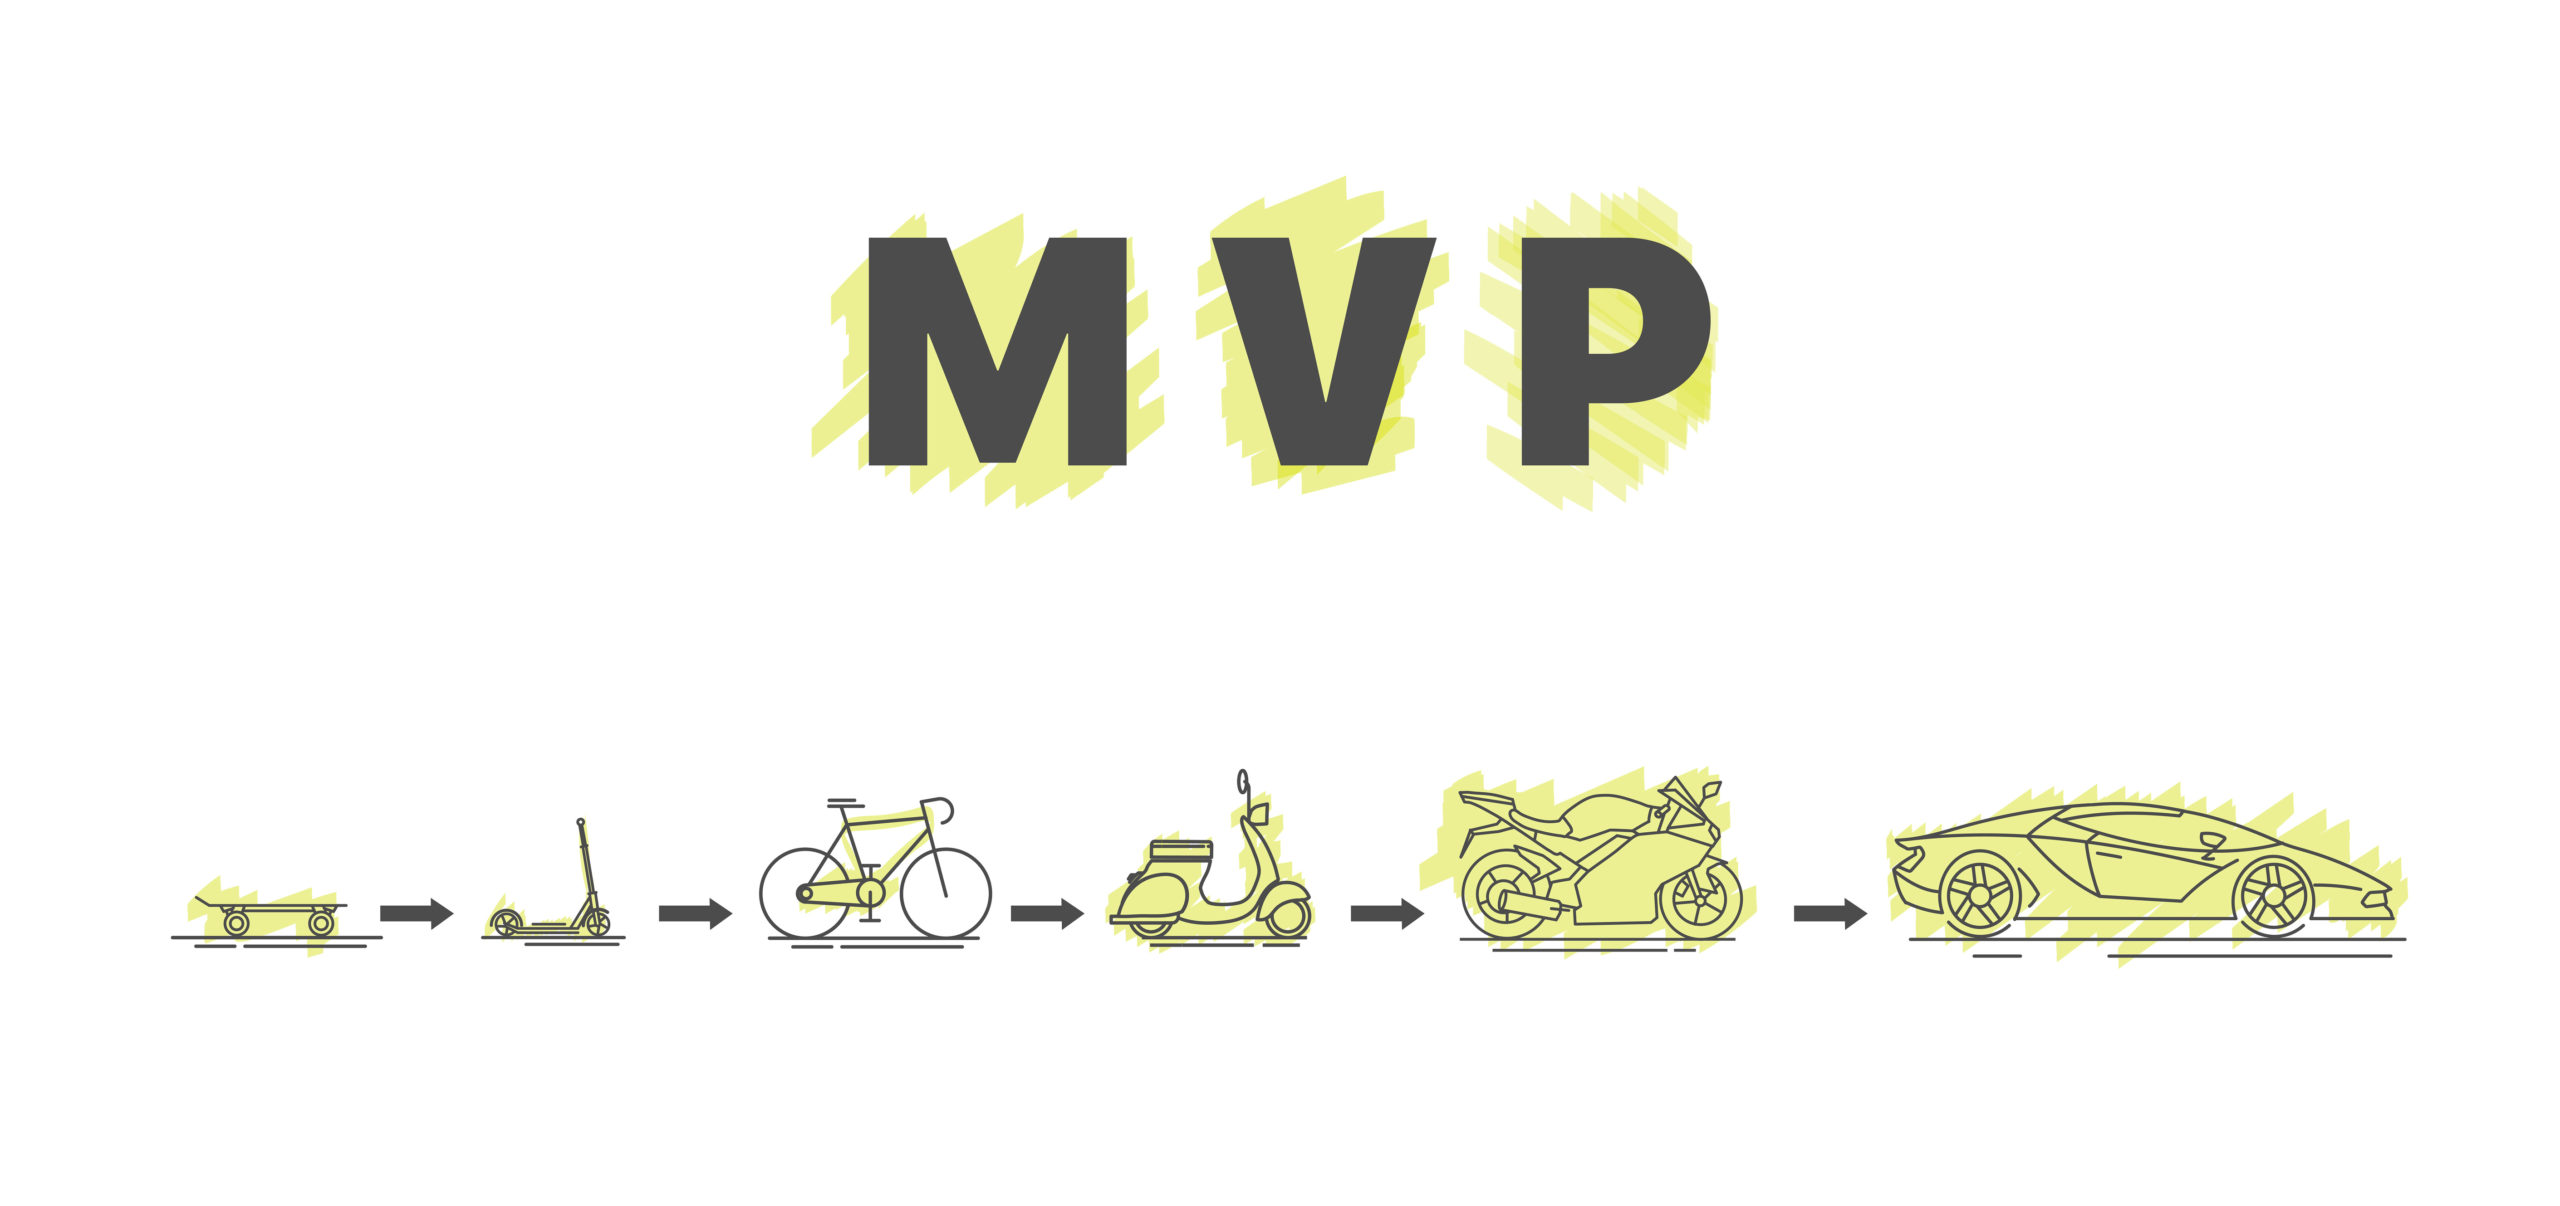 This is an image of the blog that describes what MVP is. It describes benefits of Minimum Viable Product and its benefits.